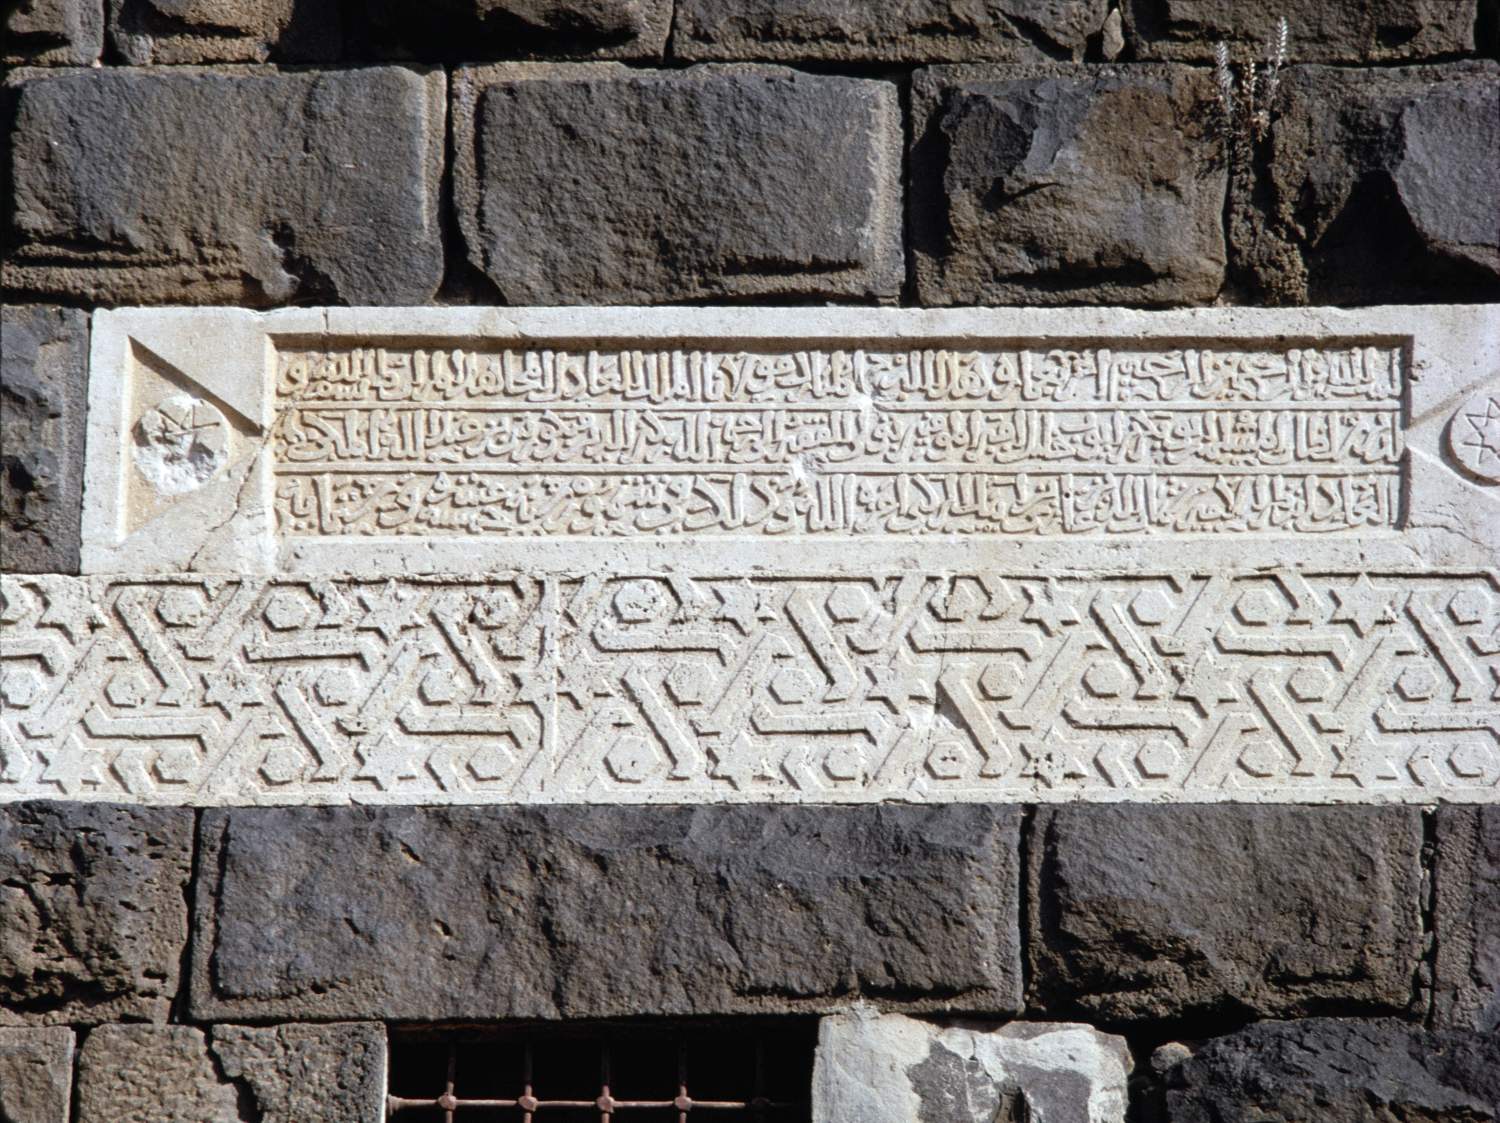 View of inscription in a tabula ansata and a band of geometric ornament below.